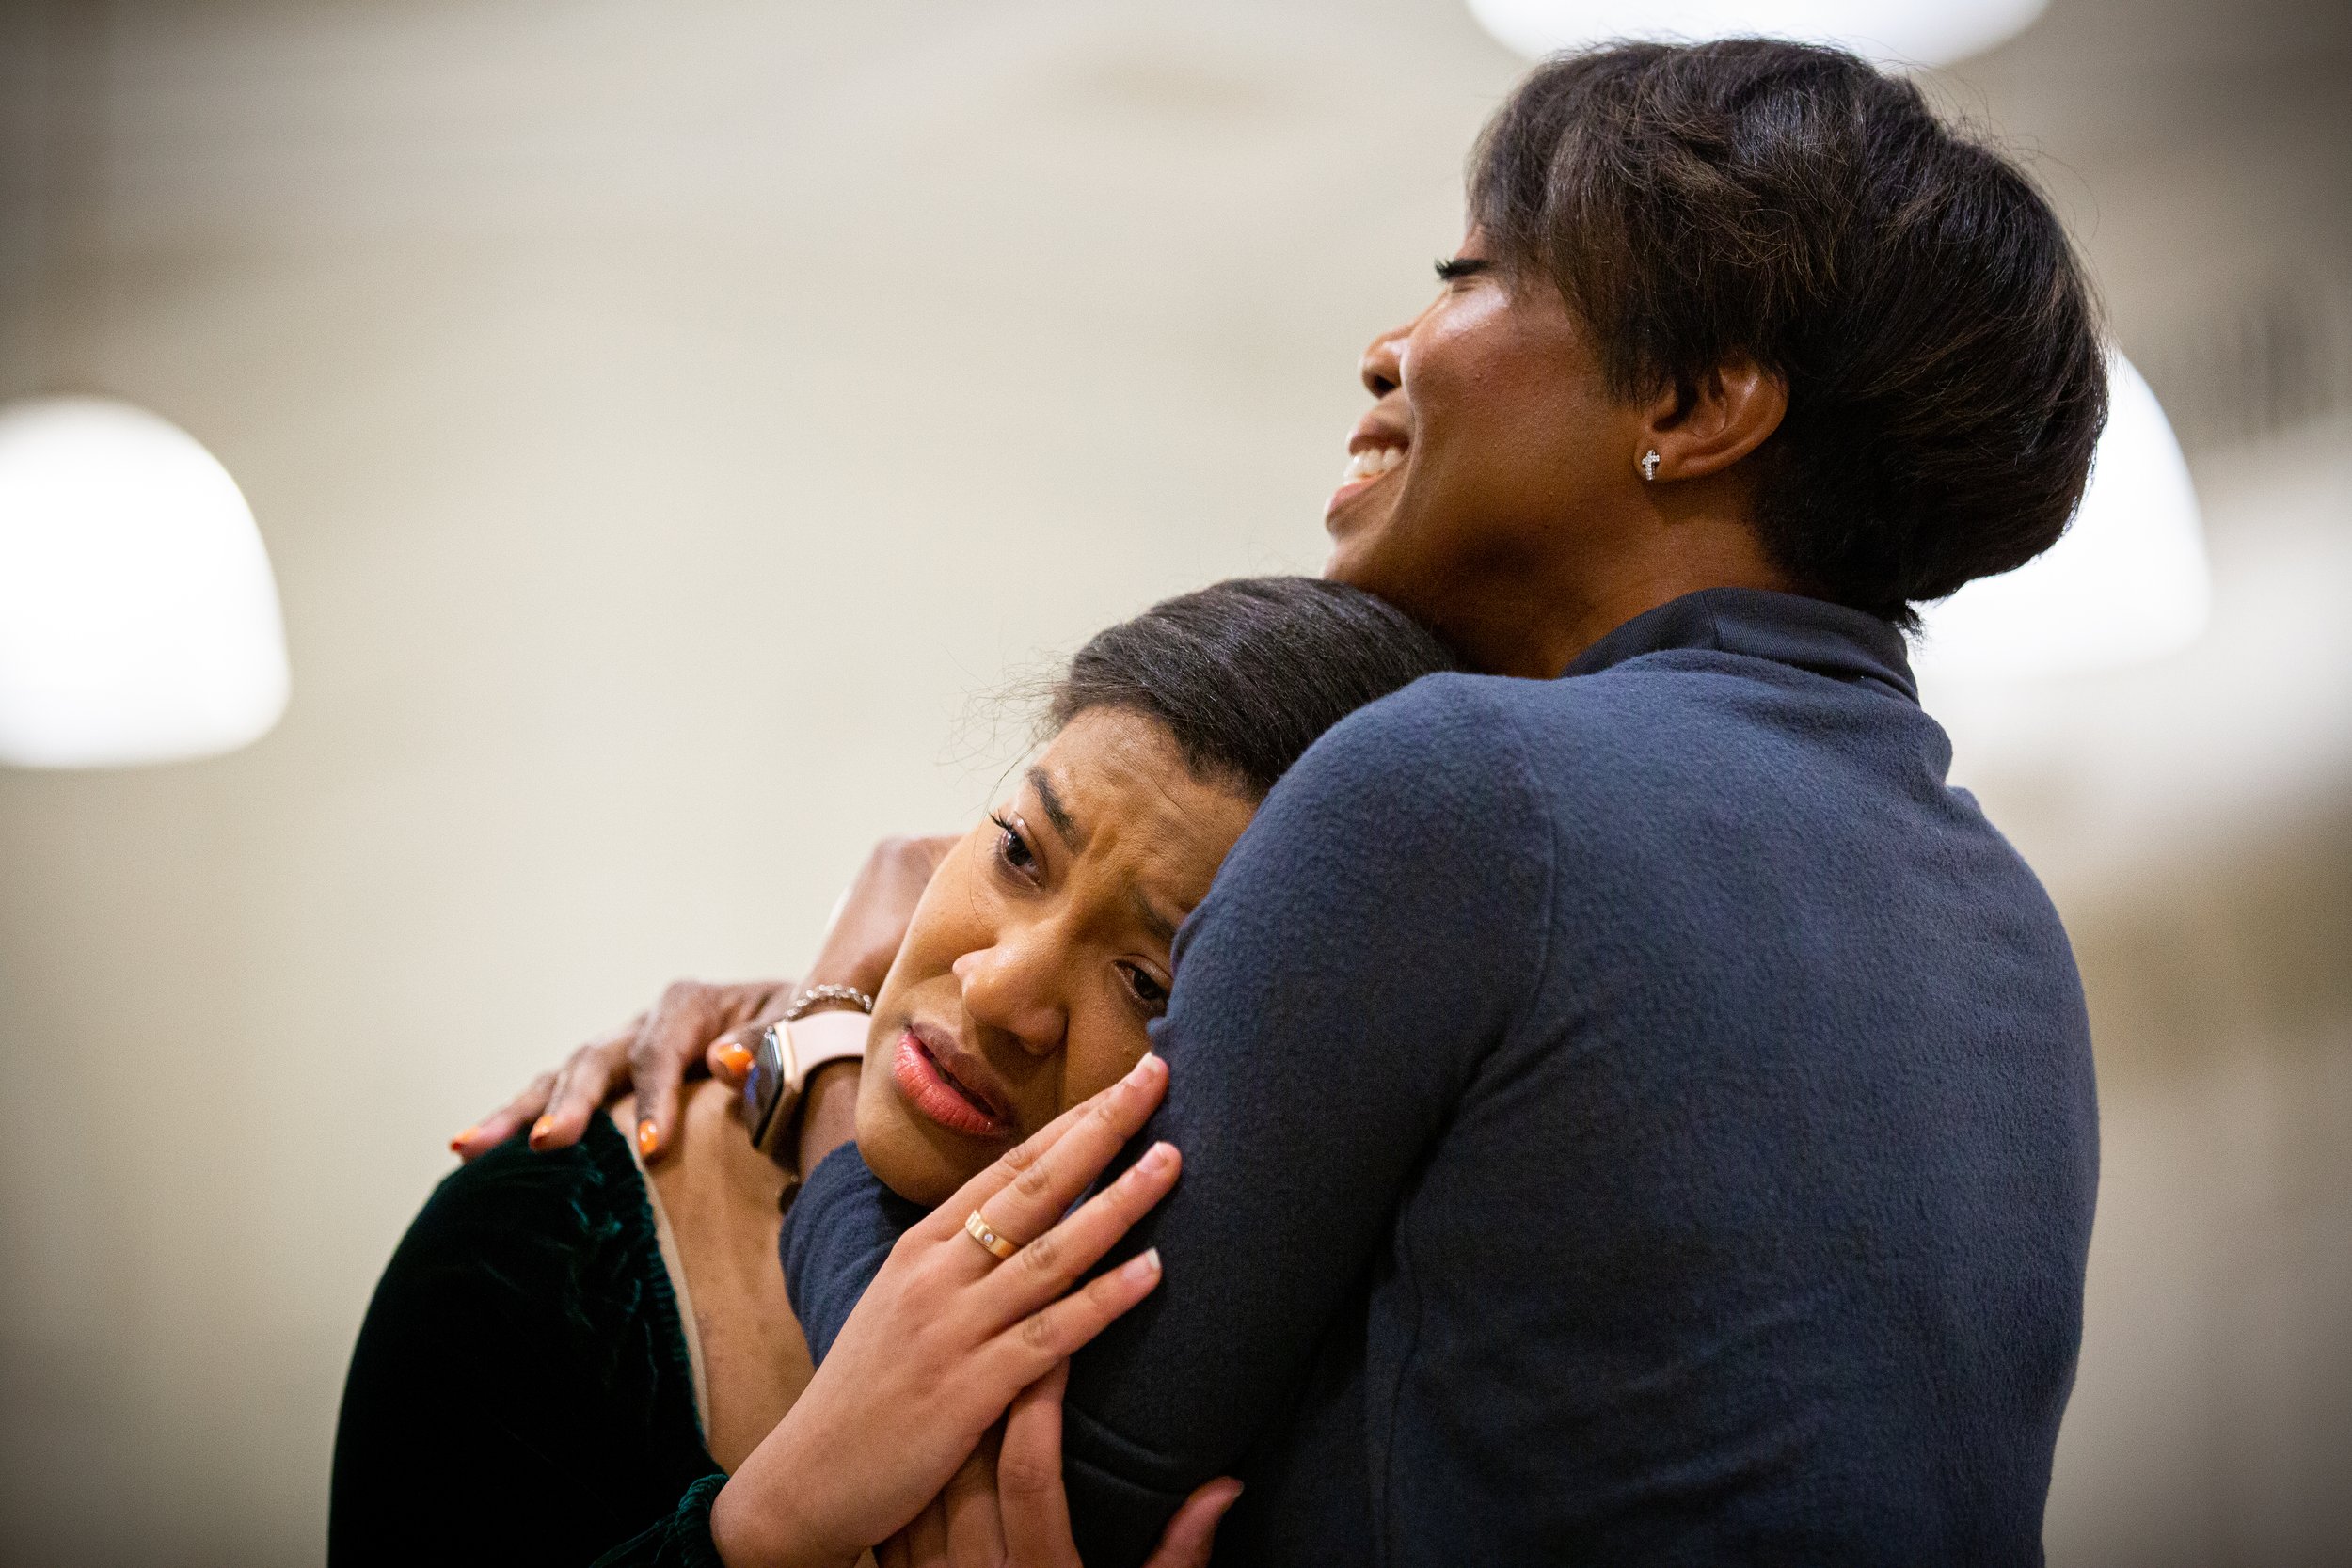  Shereen Pimentel and Heather Headley | Encores!  Into the Woods  rehearsals for  New York City Center  